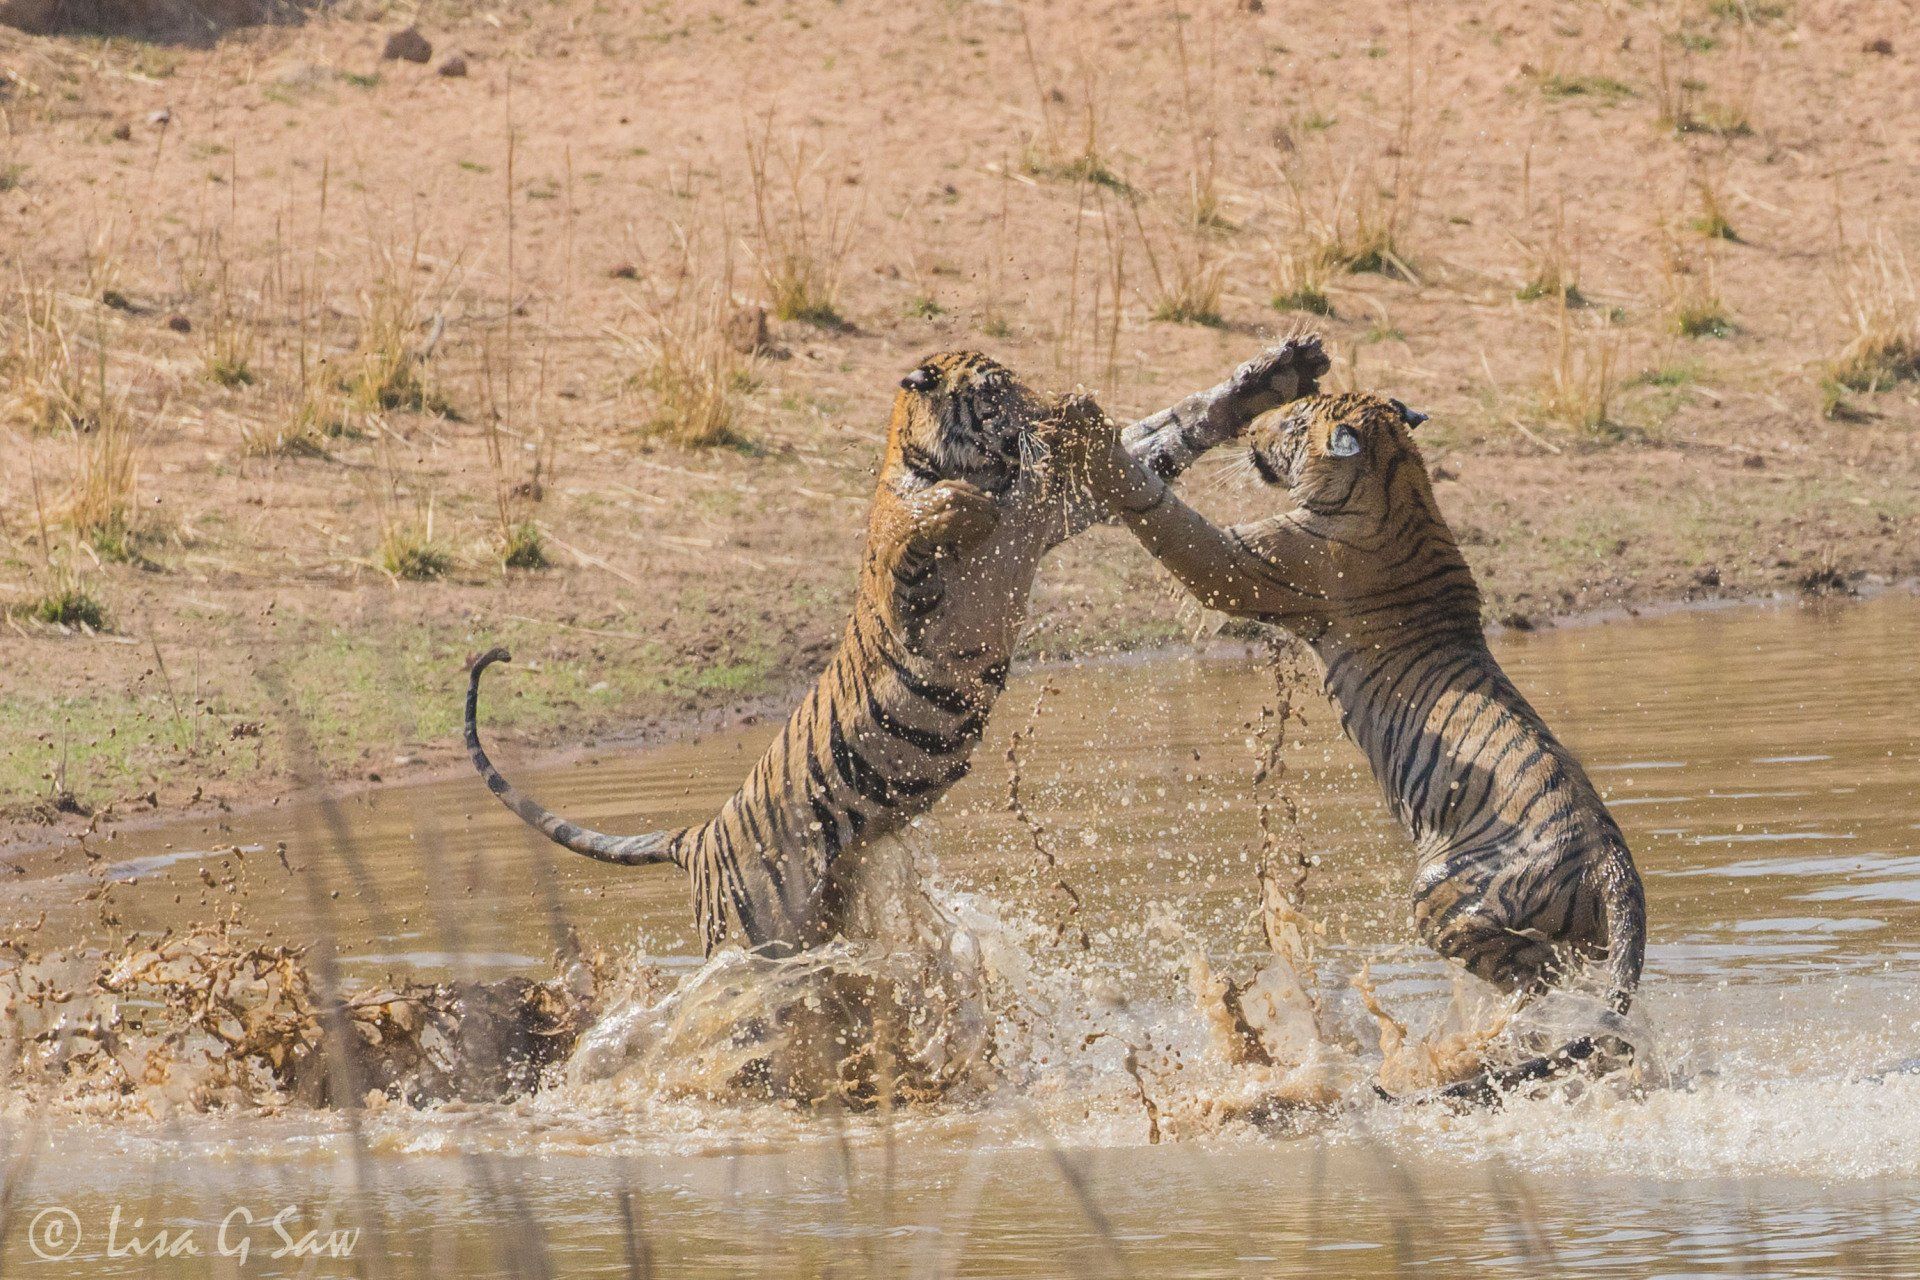 Two young tigers upright play fighting in water